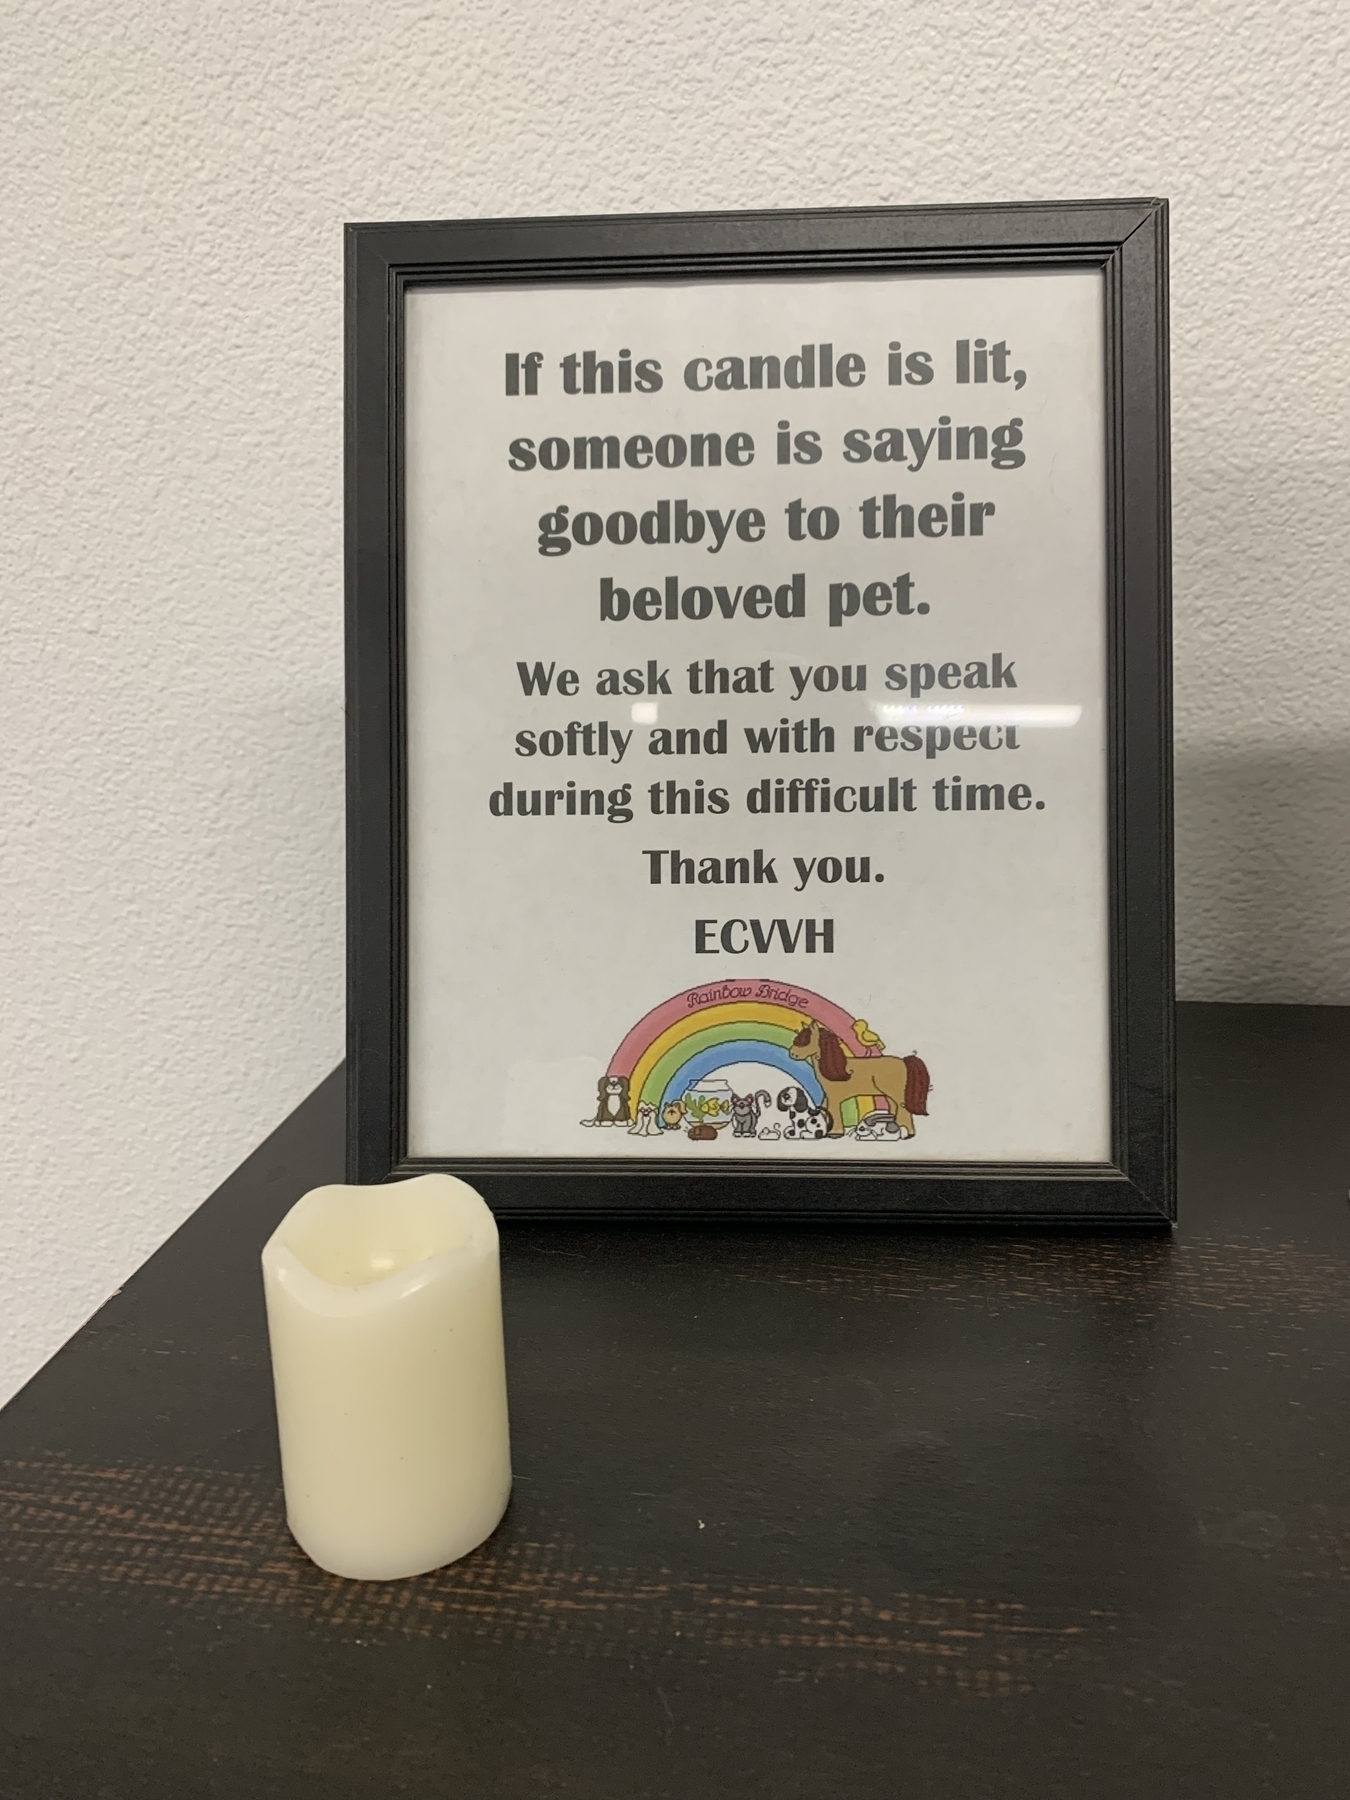 The simple sign, with a rainbow symbol, is next to a candle. The sign reads, “If this candle is lit, someone is saying goodbye to their beloved pet. We ask that you speak softly and with respect during this difficult time. Thank you.”